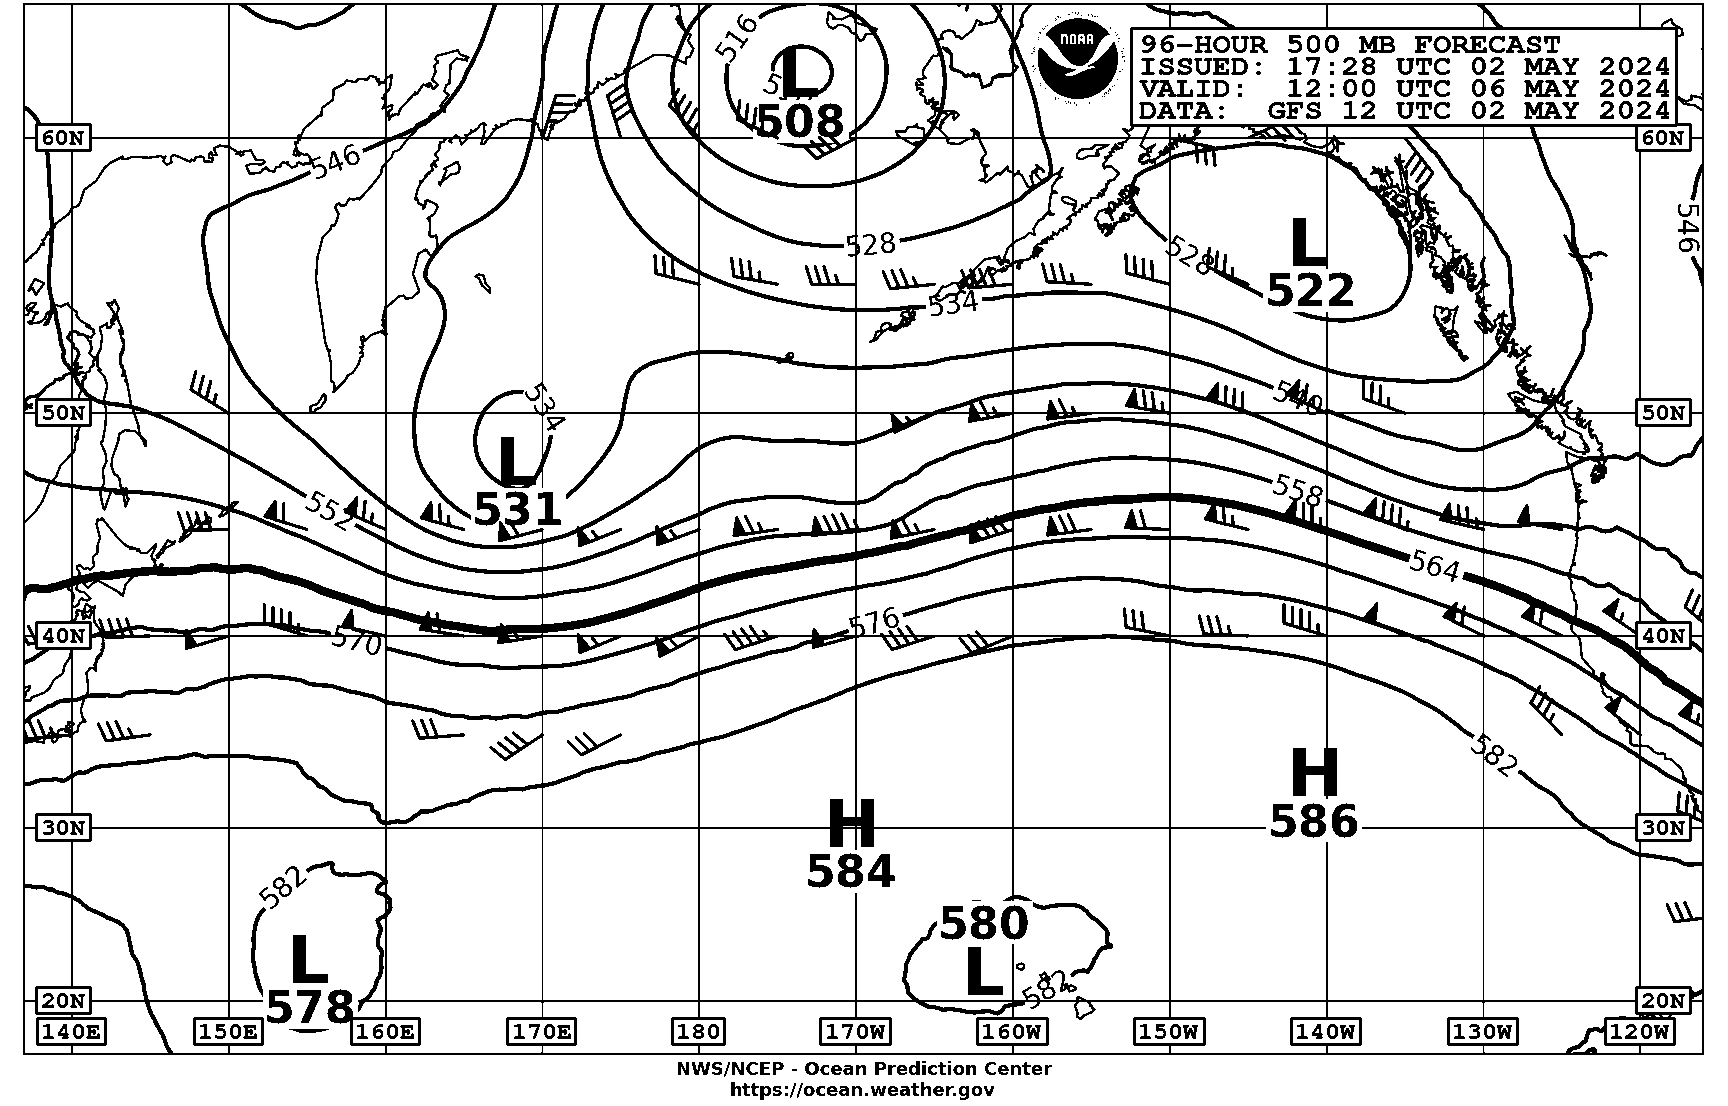 96 hour Pacific 500 mb